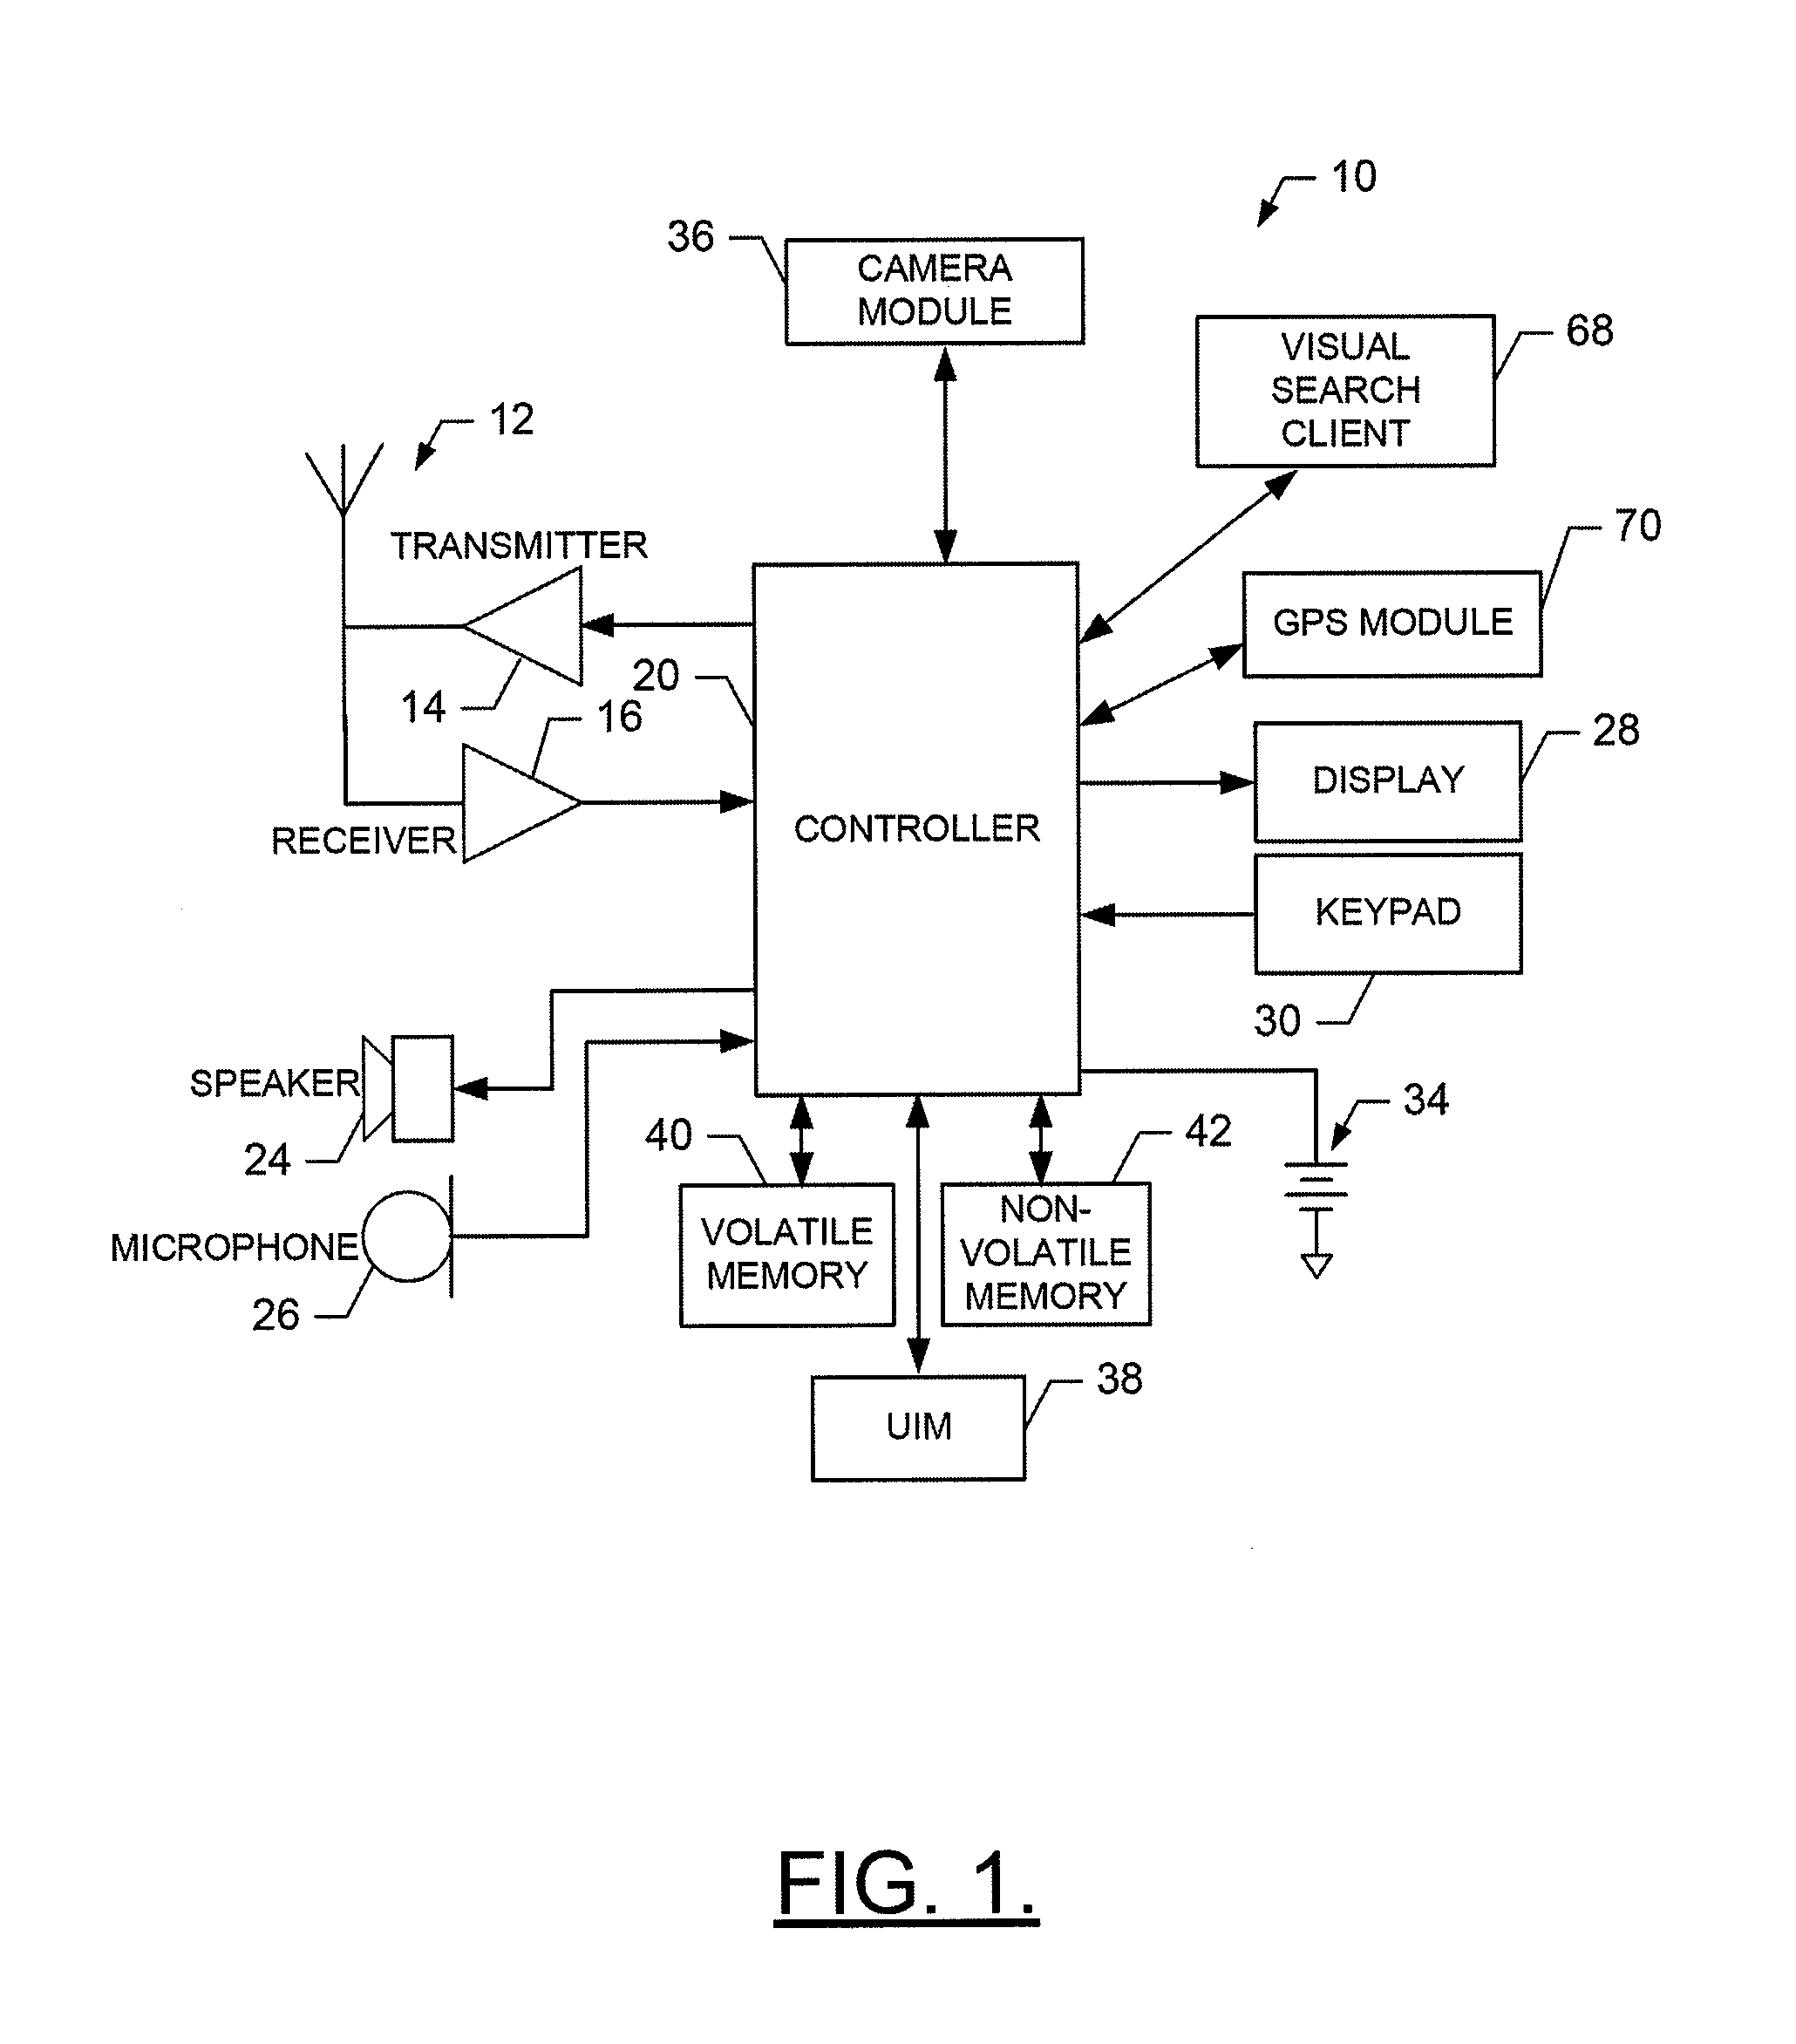 Method, Apparatus and Computer Program Product for Determining Relevance and/or Ambiguity in a Search System